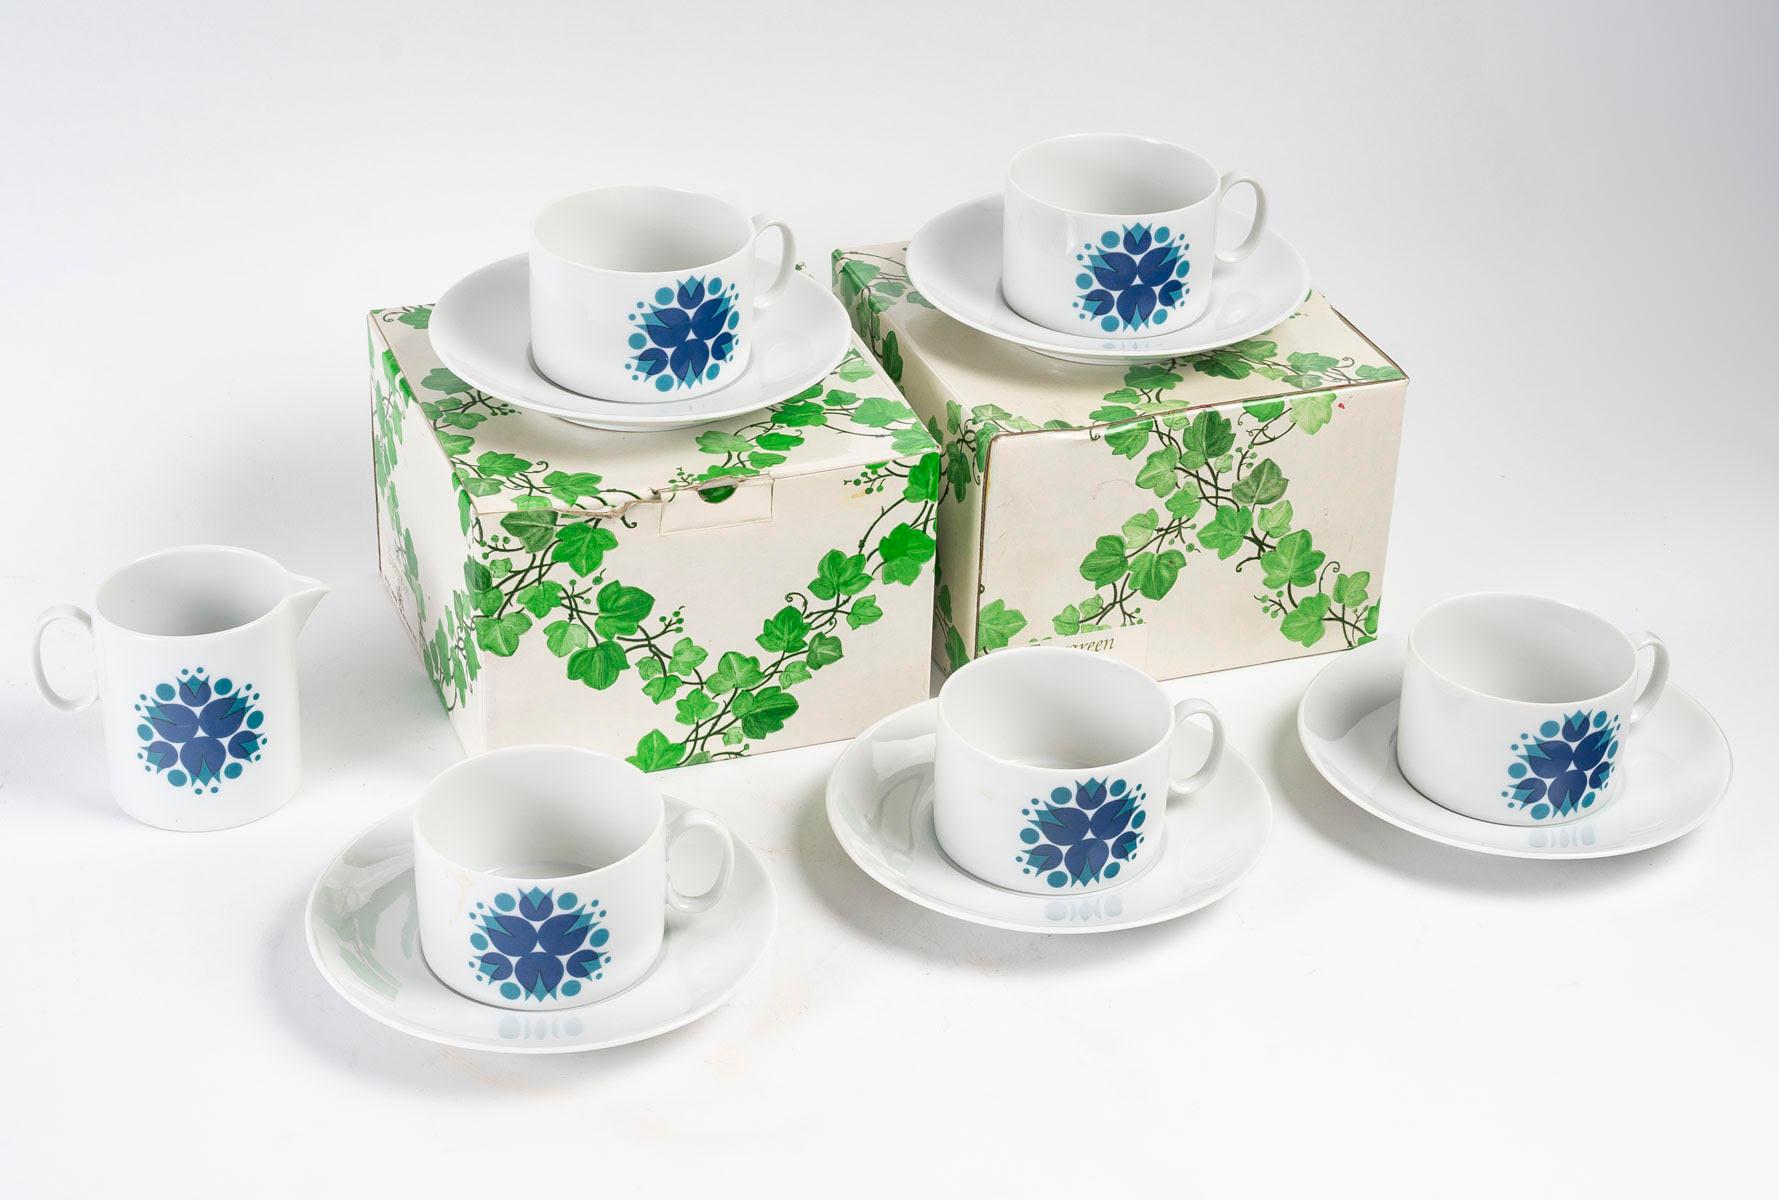 4 porcelain cups and saucers from the 1960s by Maison Thomas.

4 porcelain cups and saucers with a small milk jug from the 1960s by Maison Thomas, Germany, one cup and saucer chipped.
h: 6cm, D: 15cm